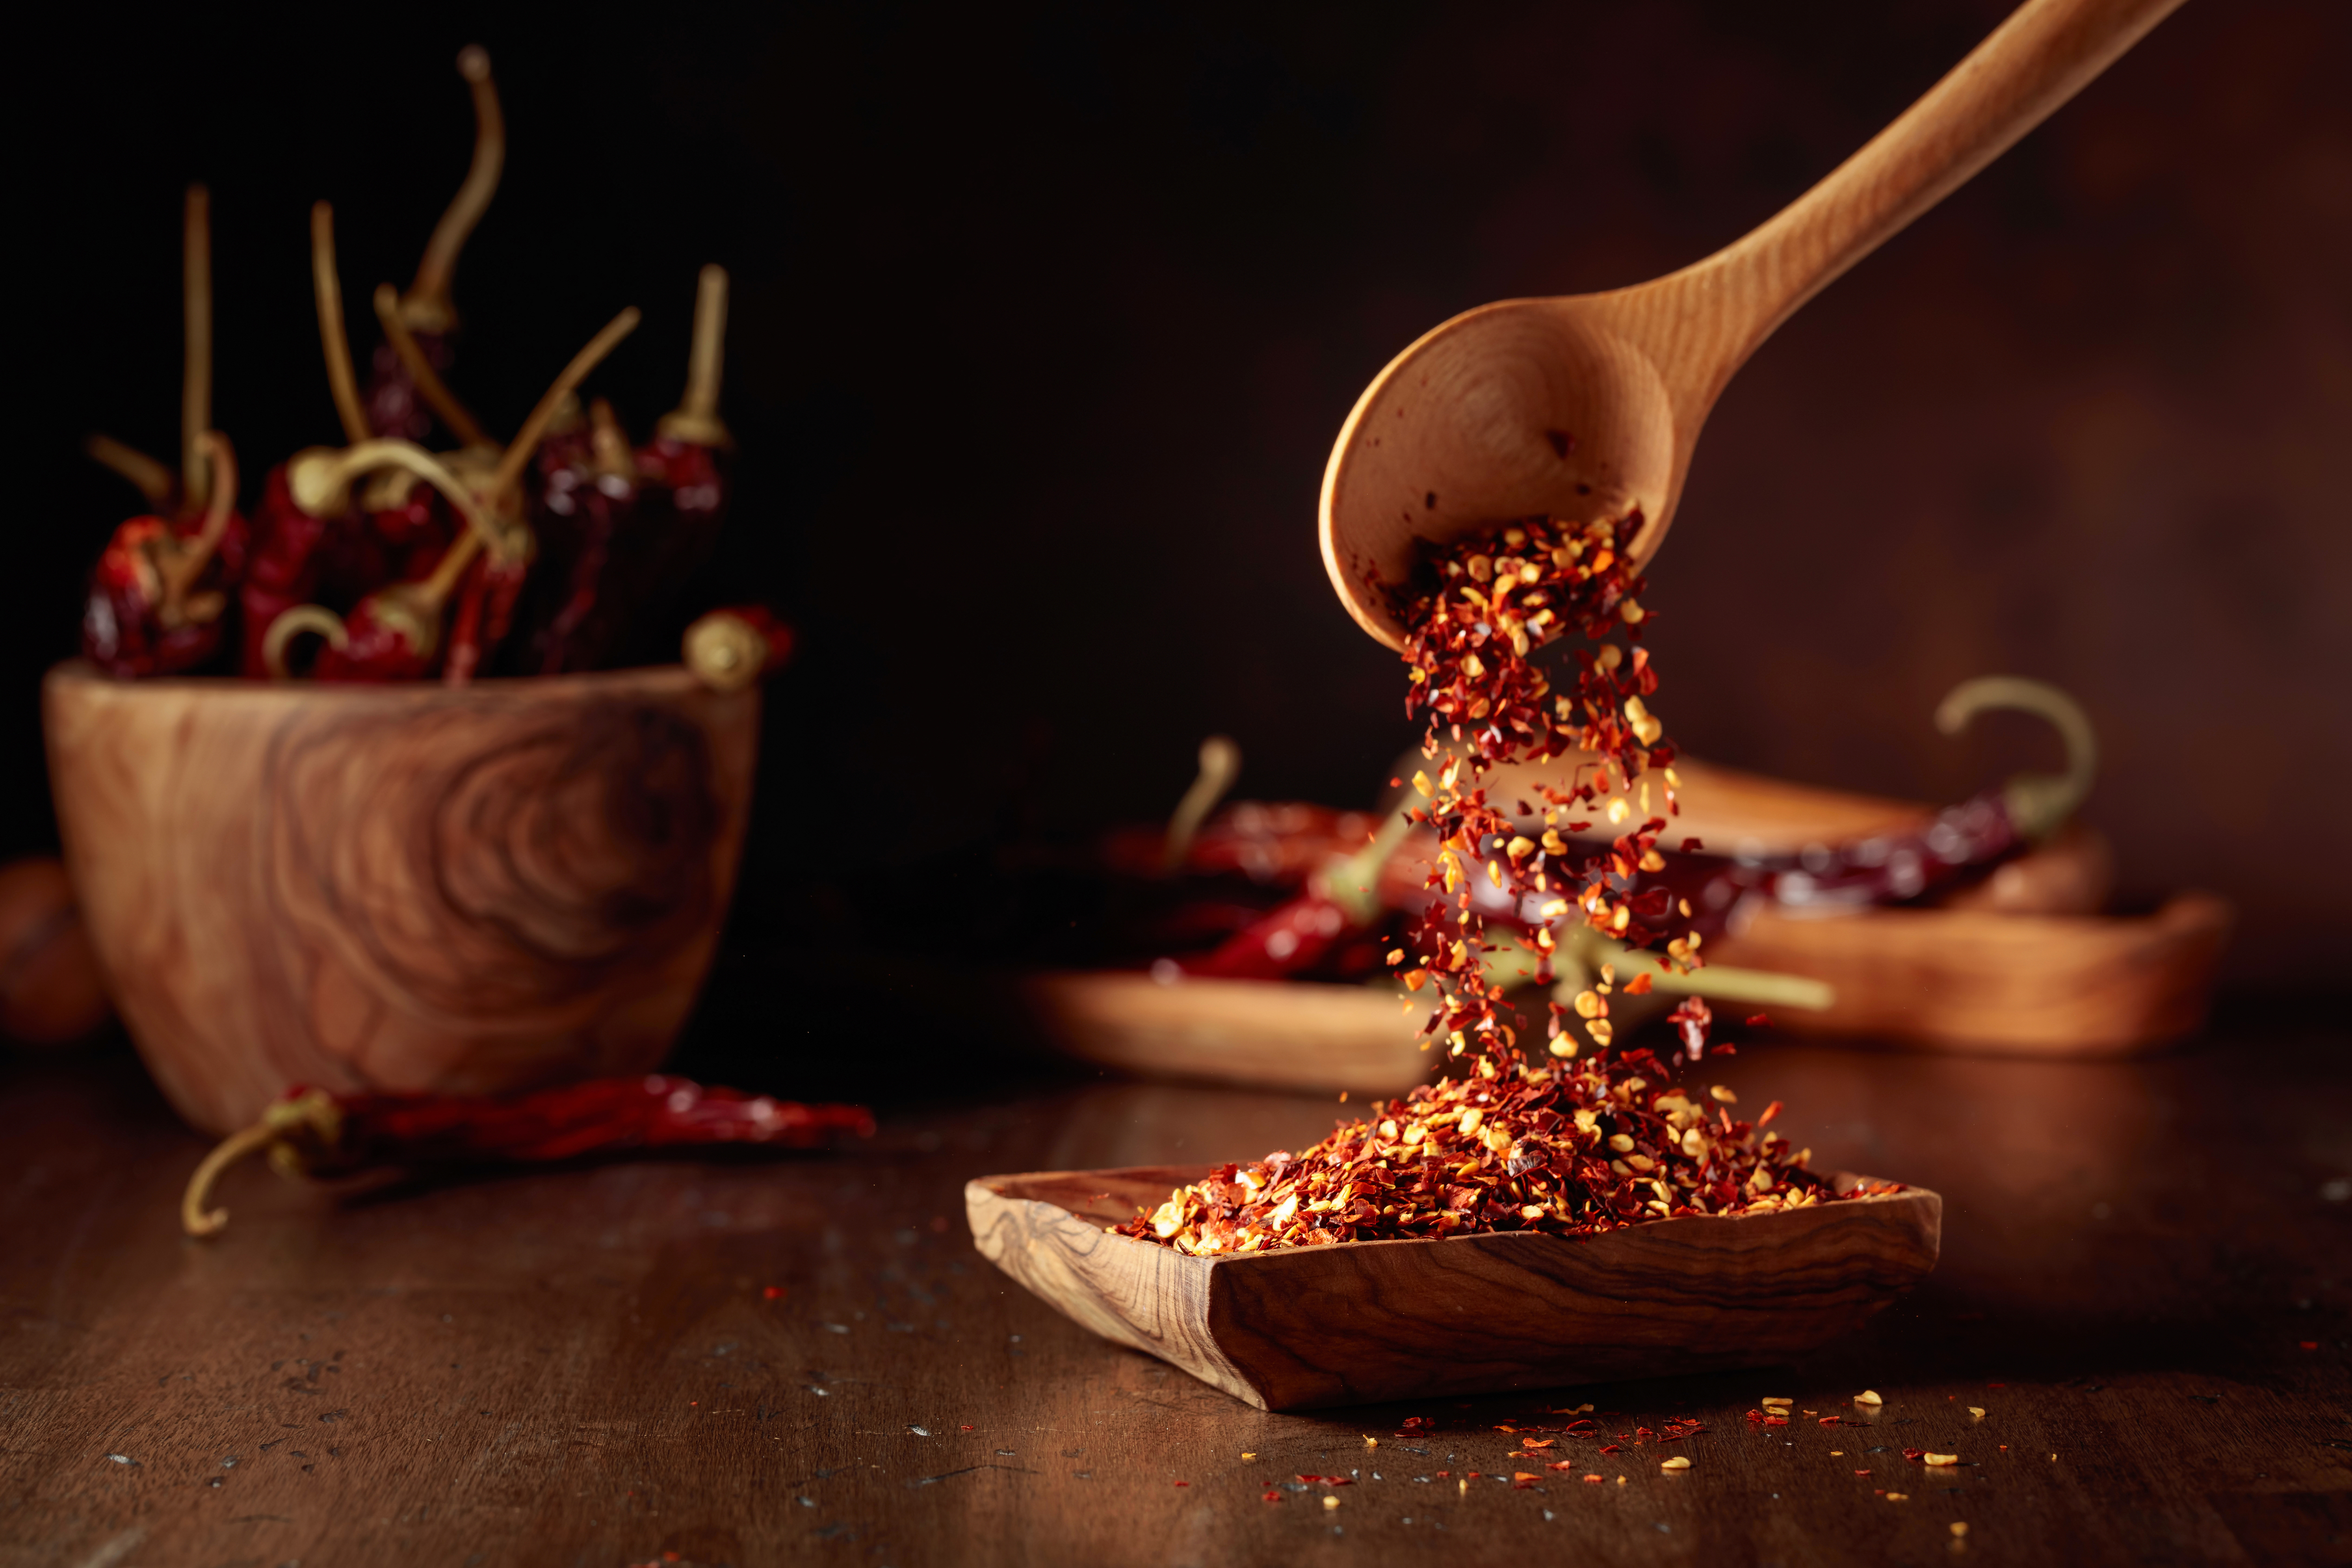 Chili flakes being poured from a wooden spoon into a bowl with whole chilies in the background